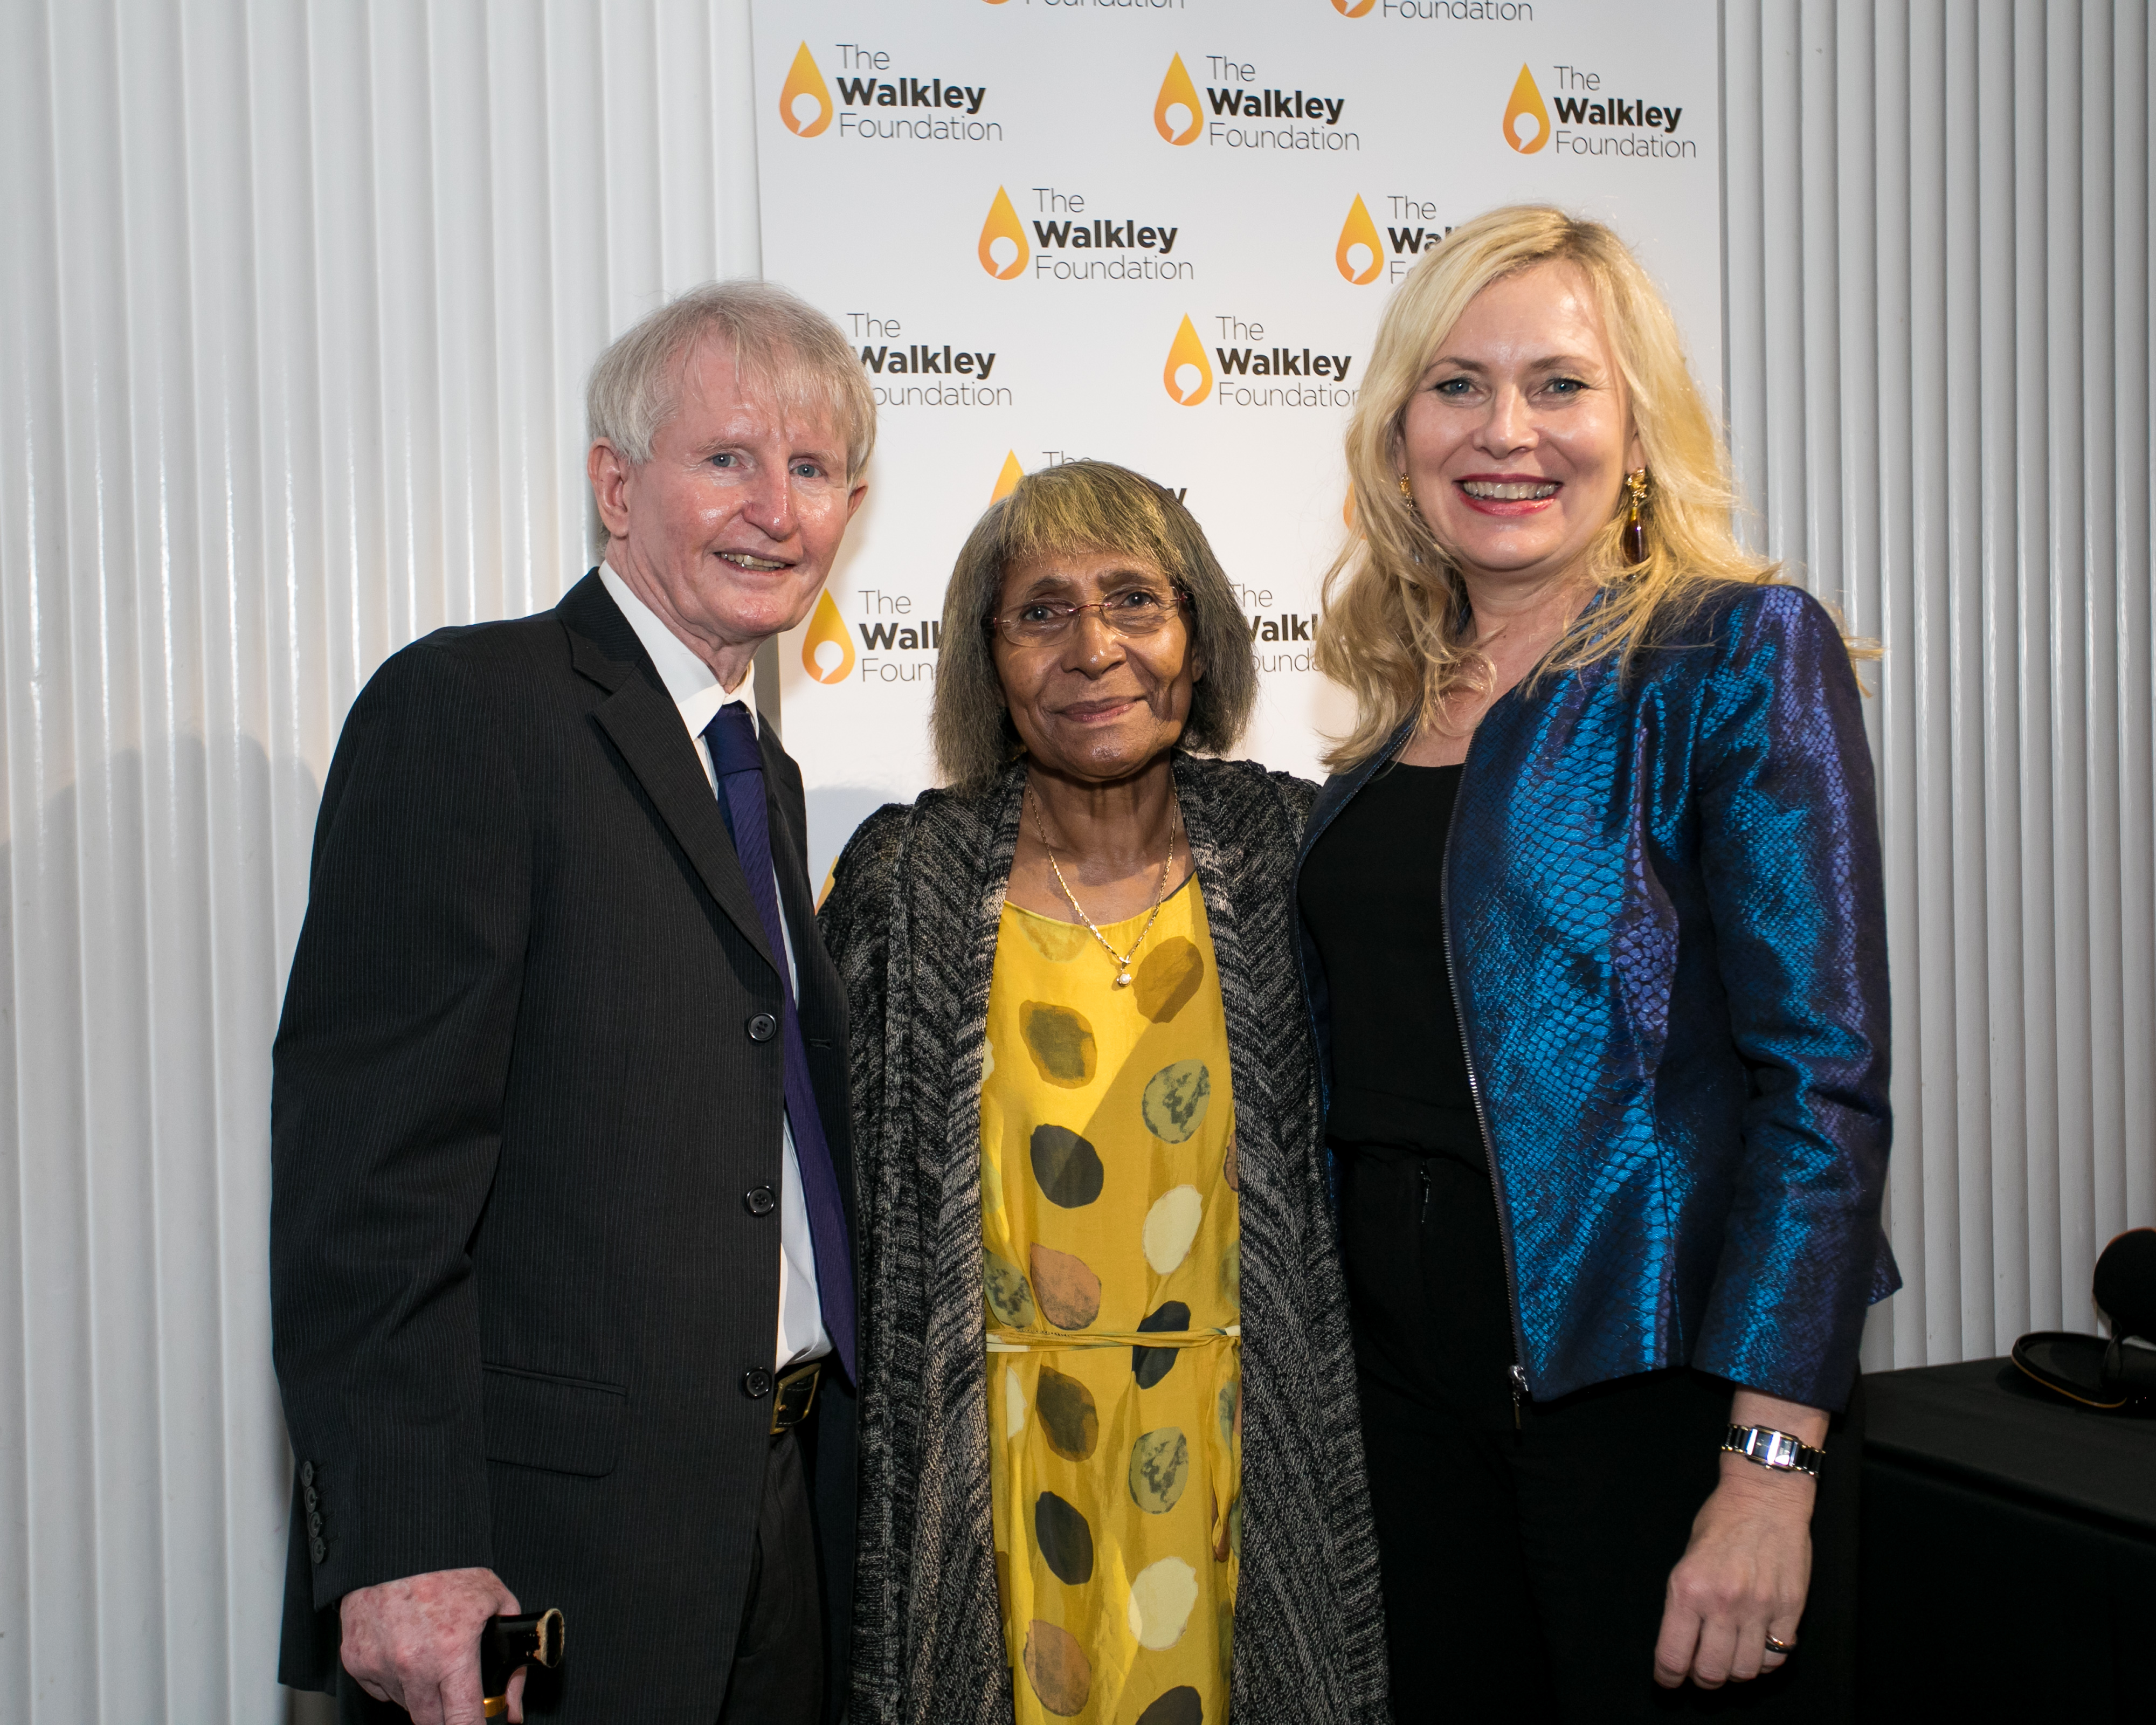 Sean and Pauline Dorney with Louisa Graham of the Walkley Foundation at the launch of the Sean Dorney Grant for Pacific Journalism (Credit: Walkley Foundation)